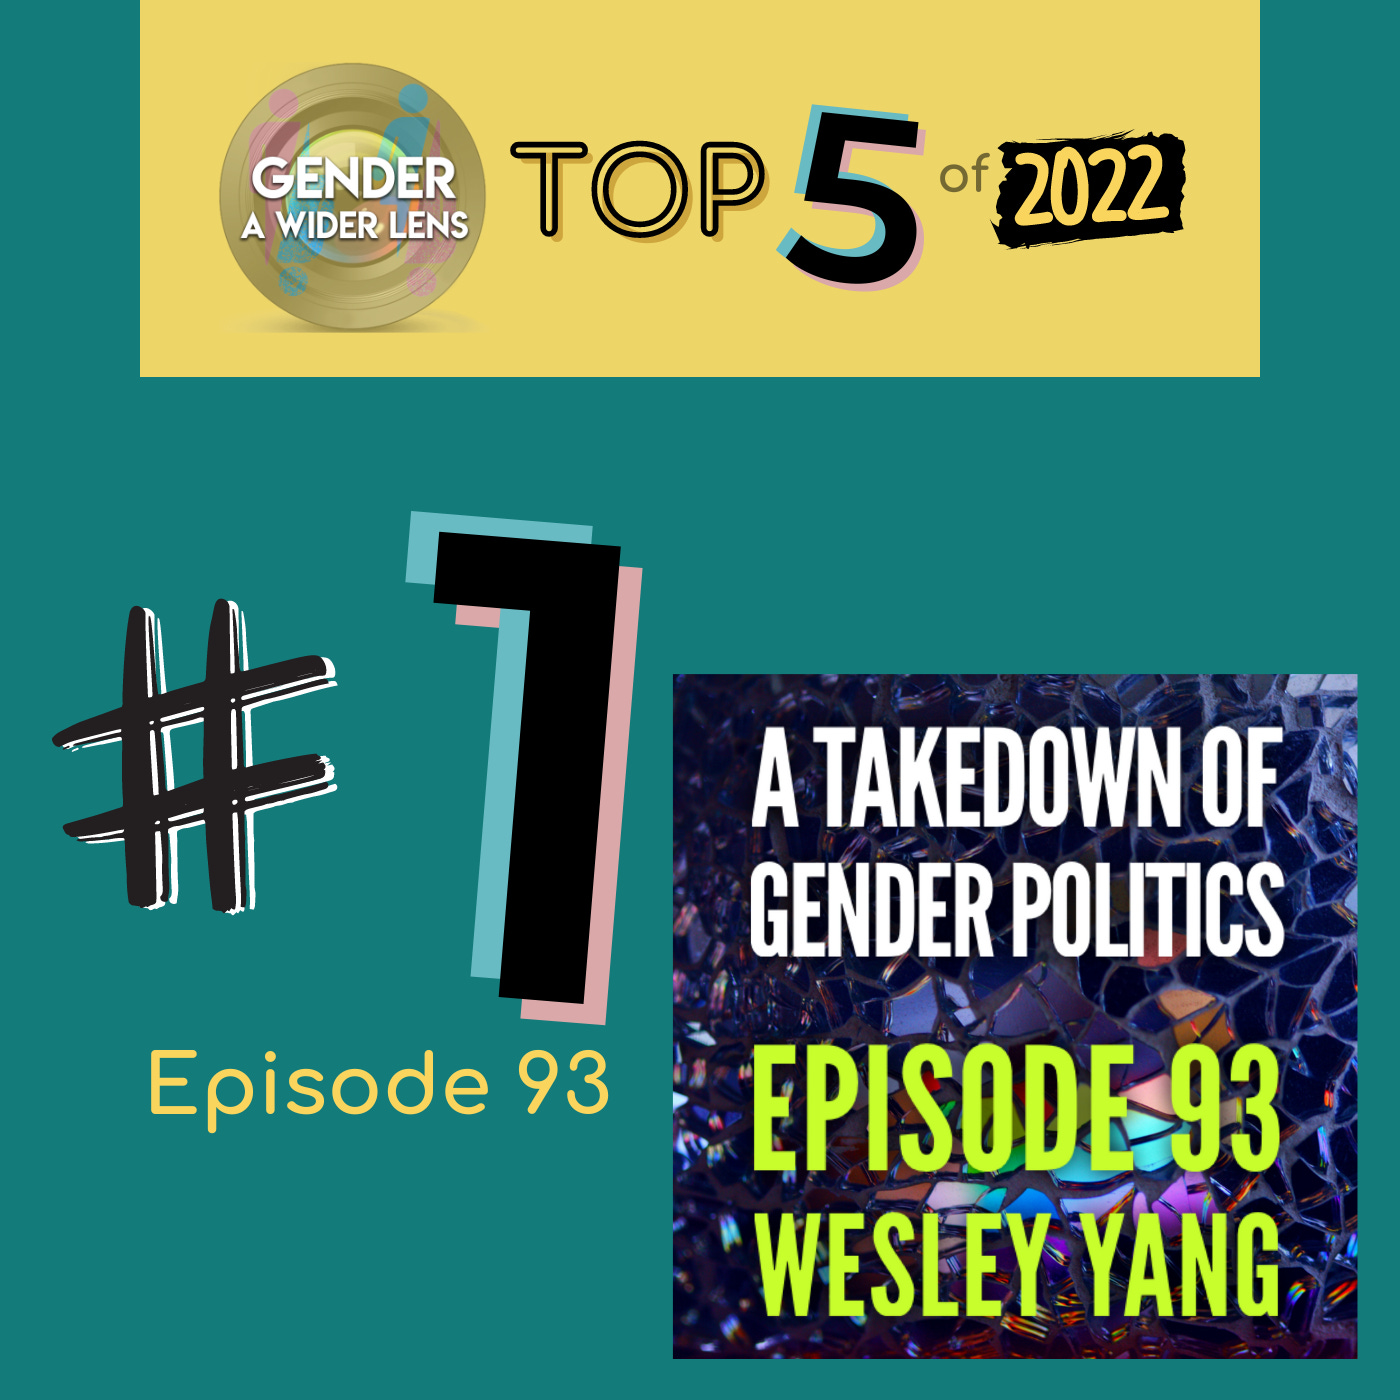 TOP 5 of 2022 Countdown: #1 EP 93 - A Takedown of Gender Politics with Wesley Yang